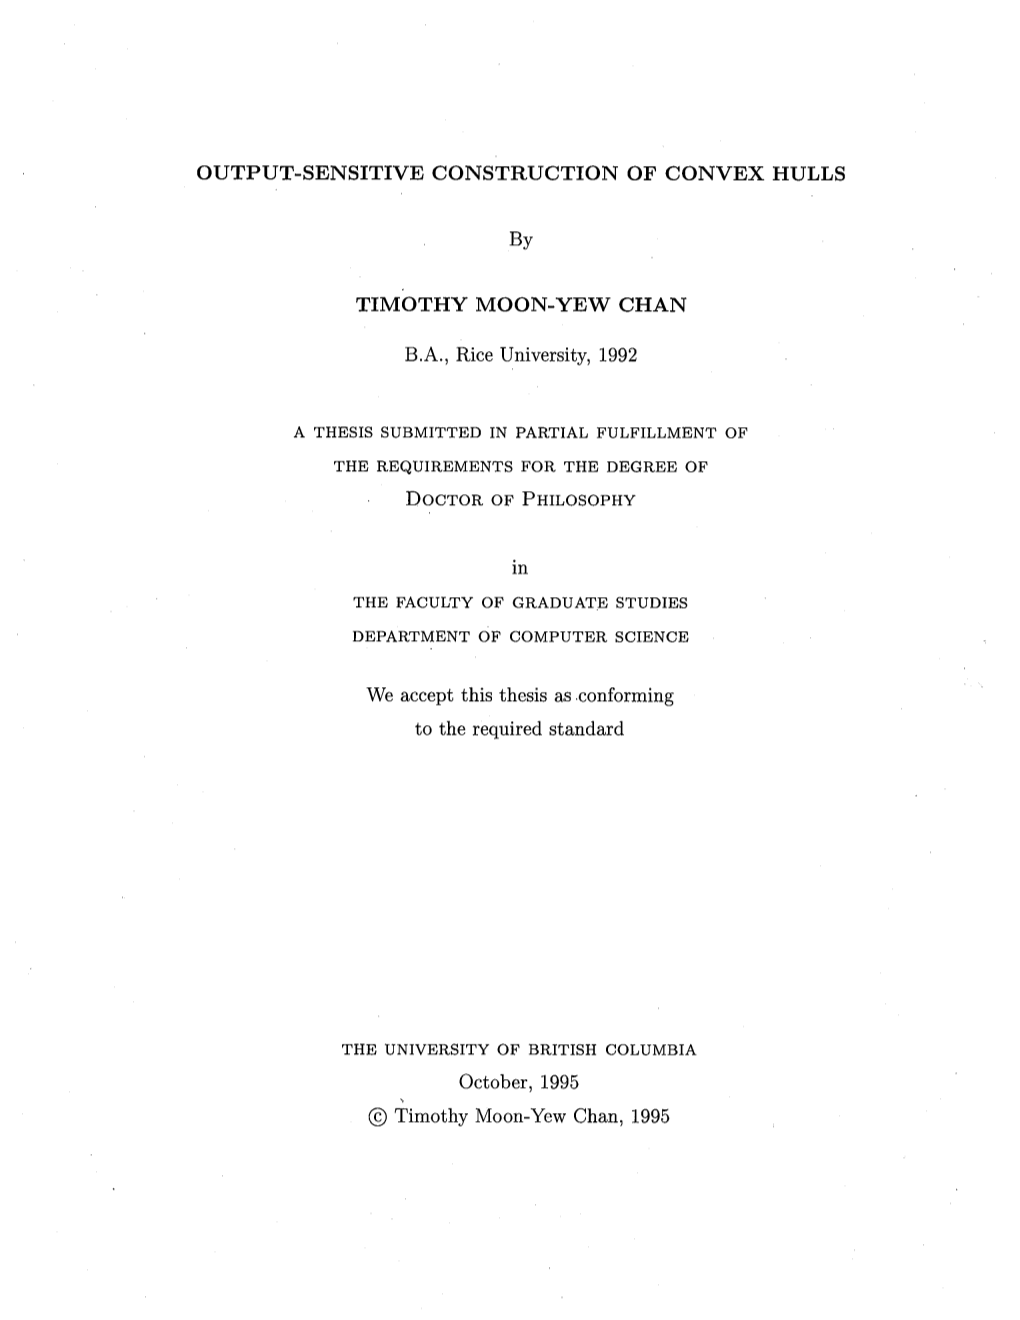 OUTPUT-SENSITIVE CONSTRUCTION of CONVEX HULLS by TIMOTHY MOON-YEW CHAN B.A., Rice University, 1992 in We Accept This Thesis As C